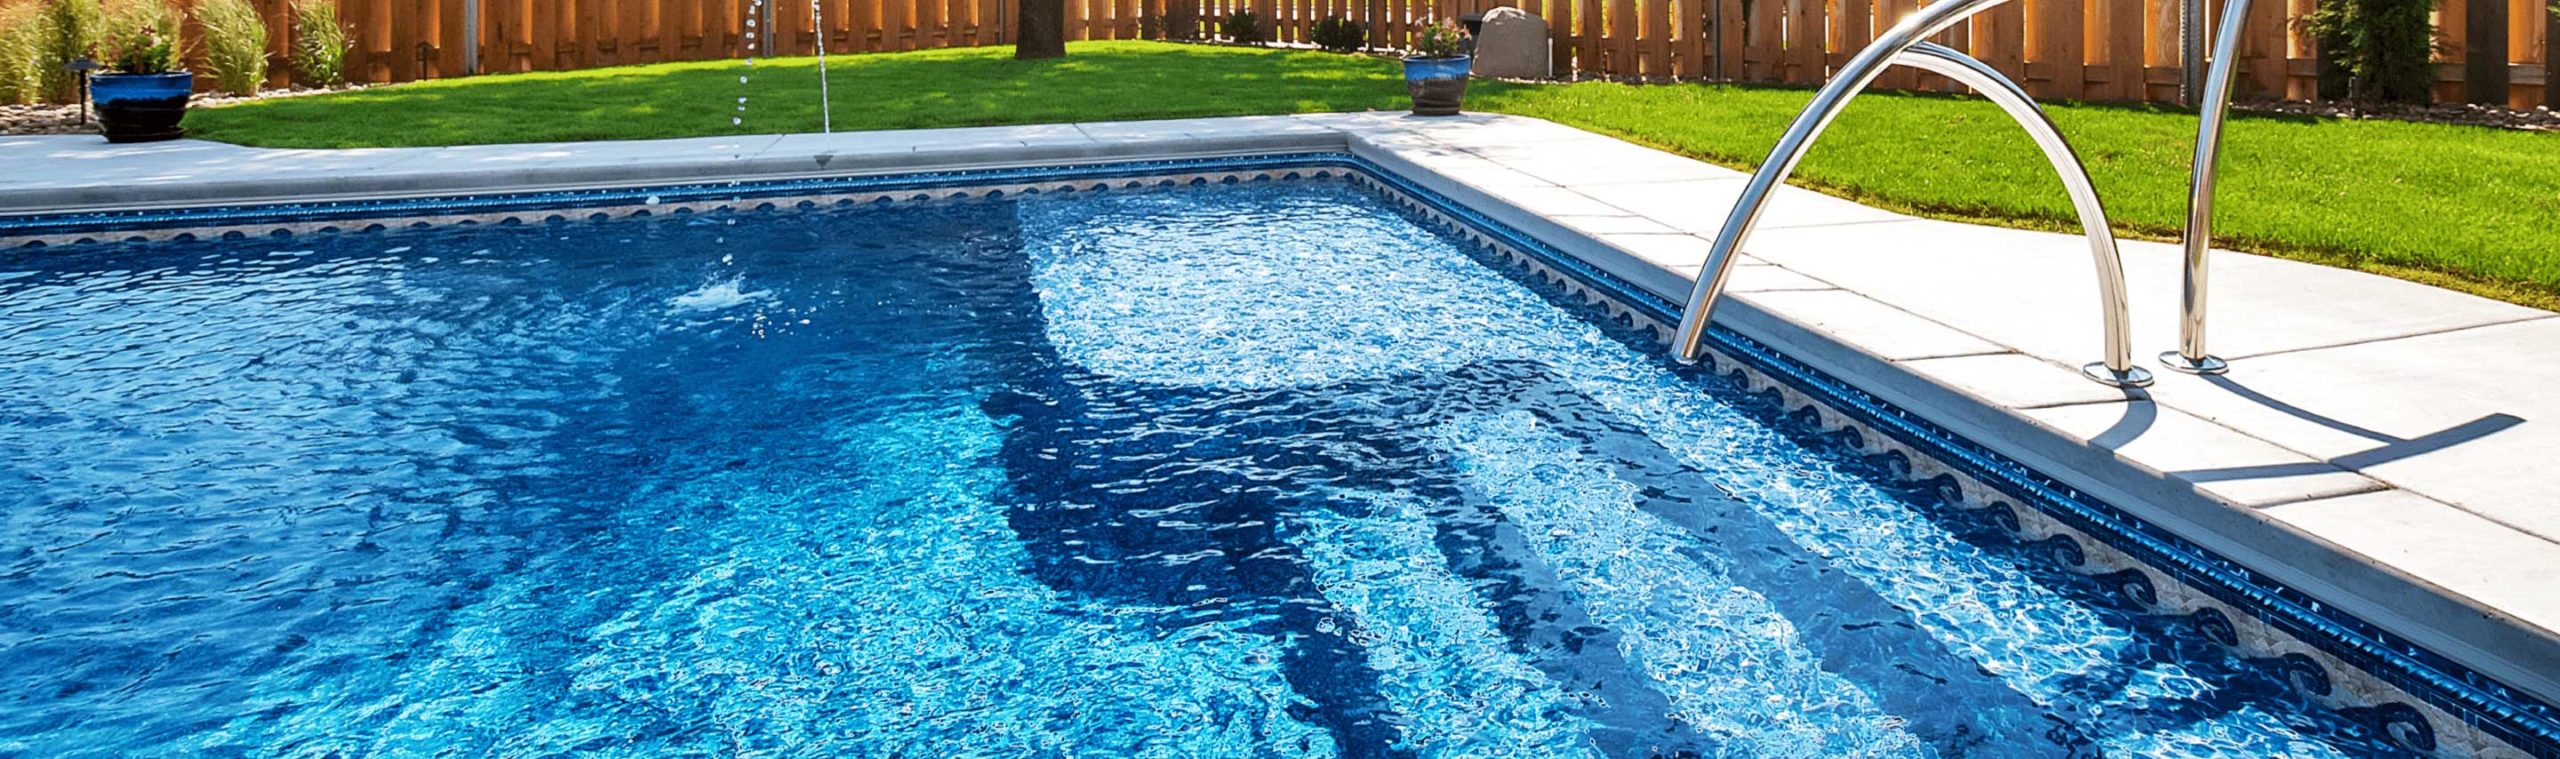 What Is The Best Above Ground Pool Ladders For Decks? Find the Perfect Match!